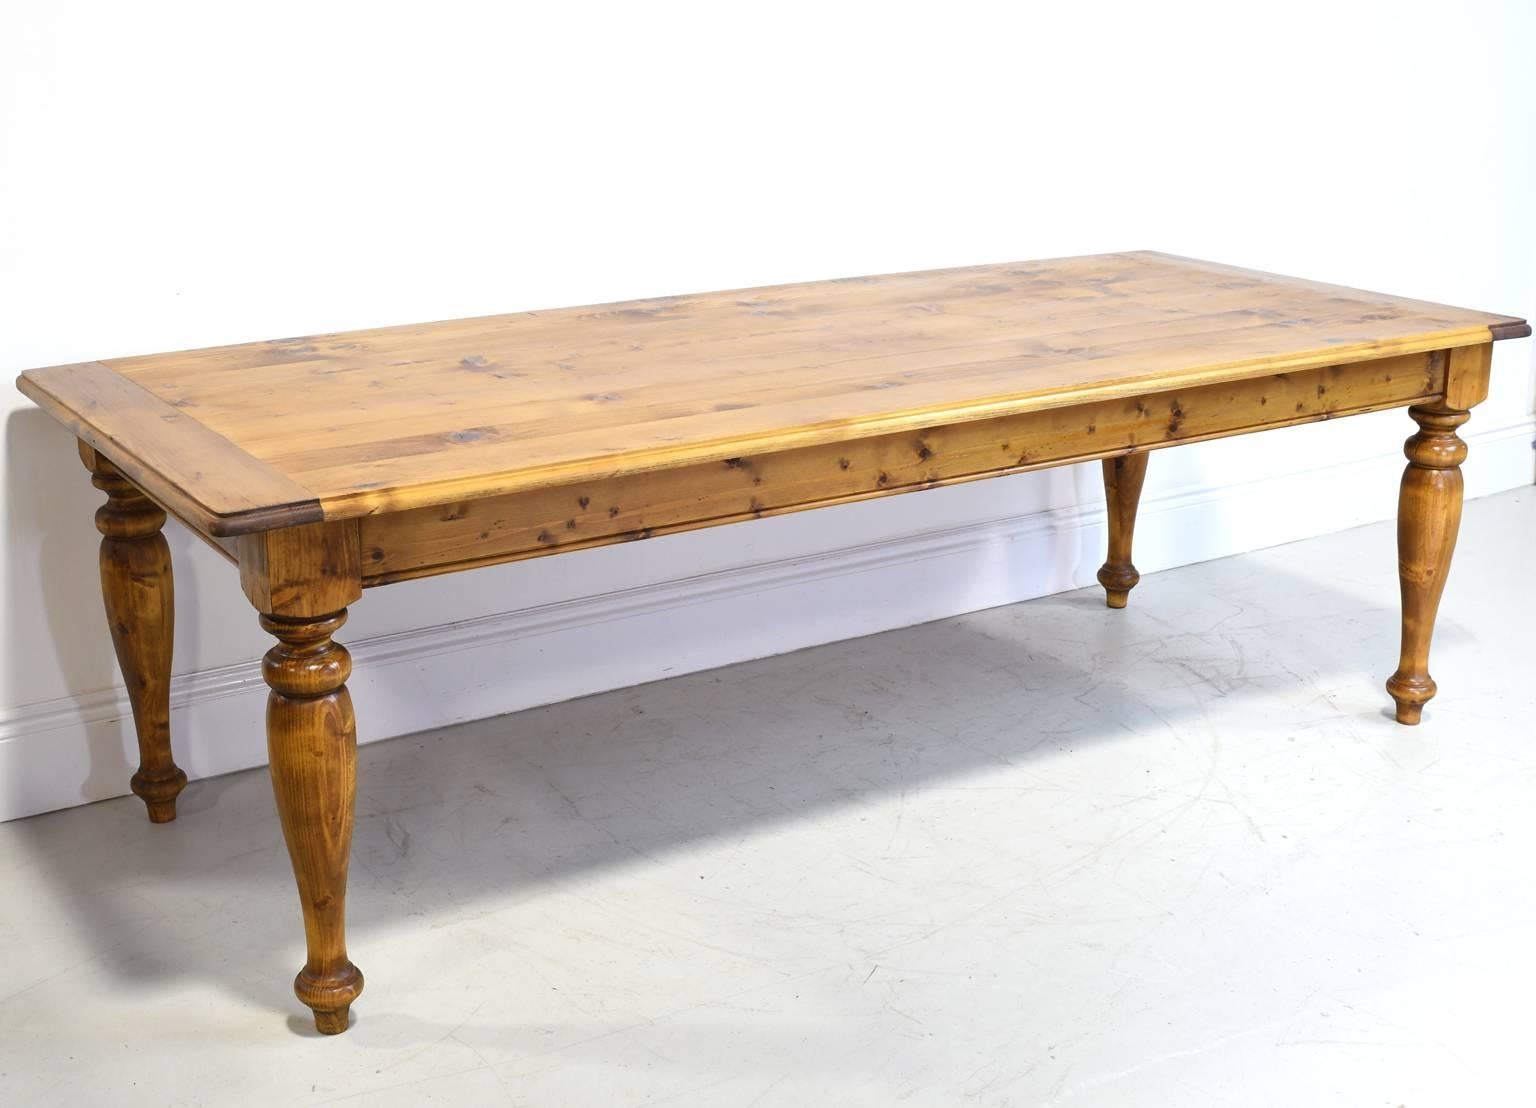 A long farmhouse kitchen or dining table in pine with plank top and turned legs. Hand-rubbed oil finish. Beautifully designed and solidly built in the Netherlands, circa 1990s.
Beautifully finished in a natural hand rubbed oil finish. Top has two